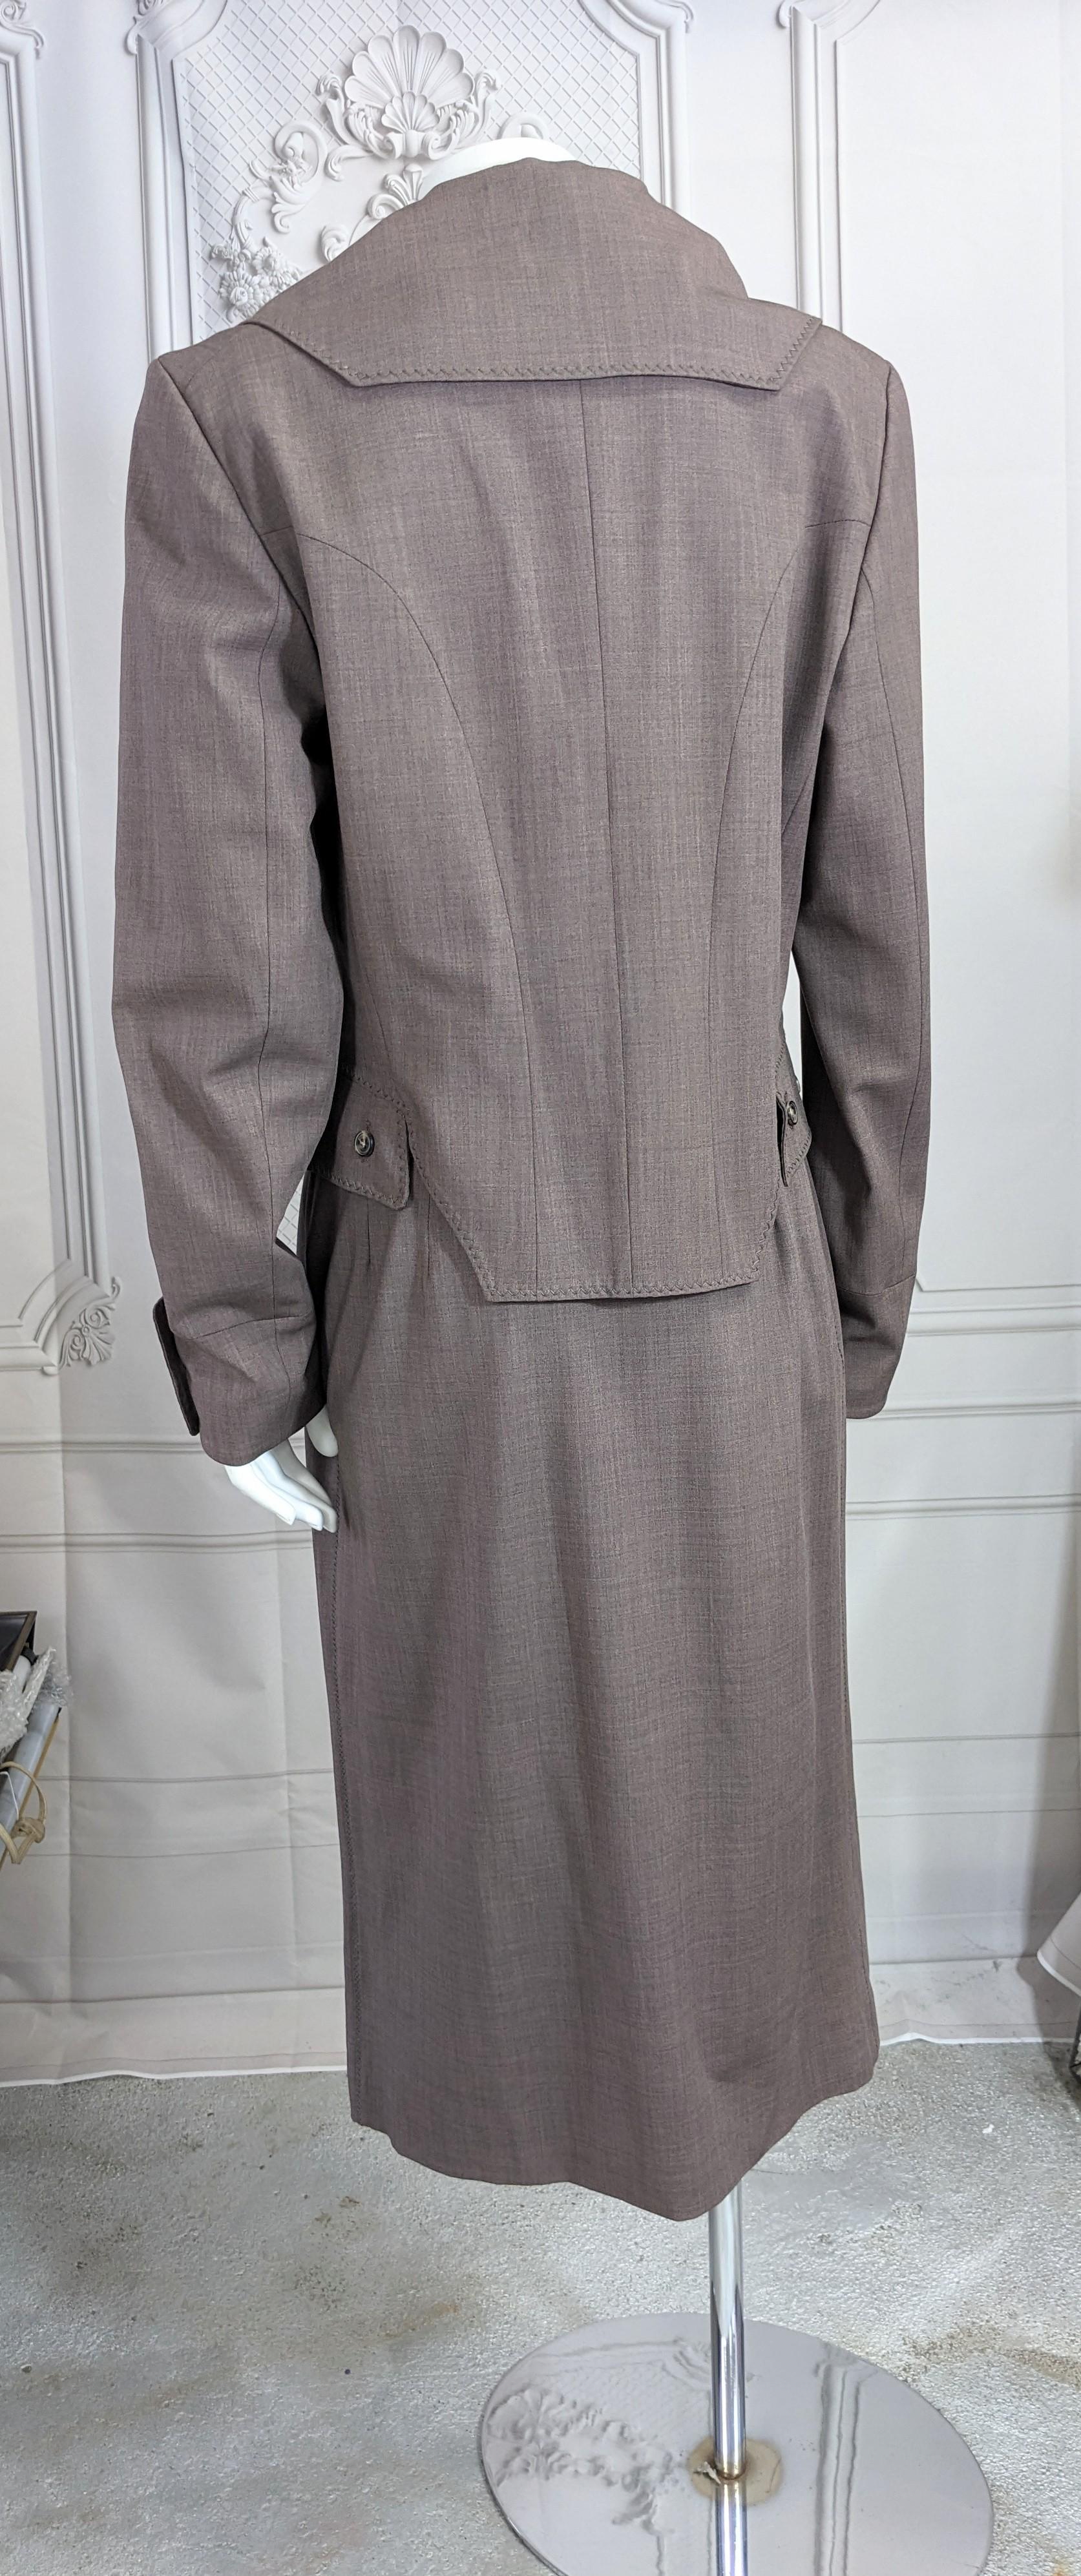 John Galliano Heathered Wool Two Piece Suit S/S 2001 For Sale 2